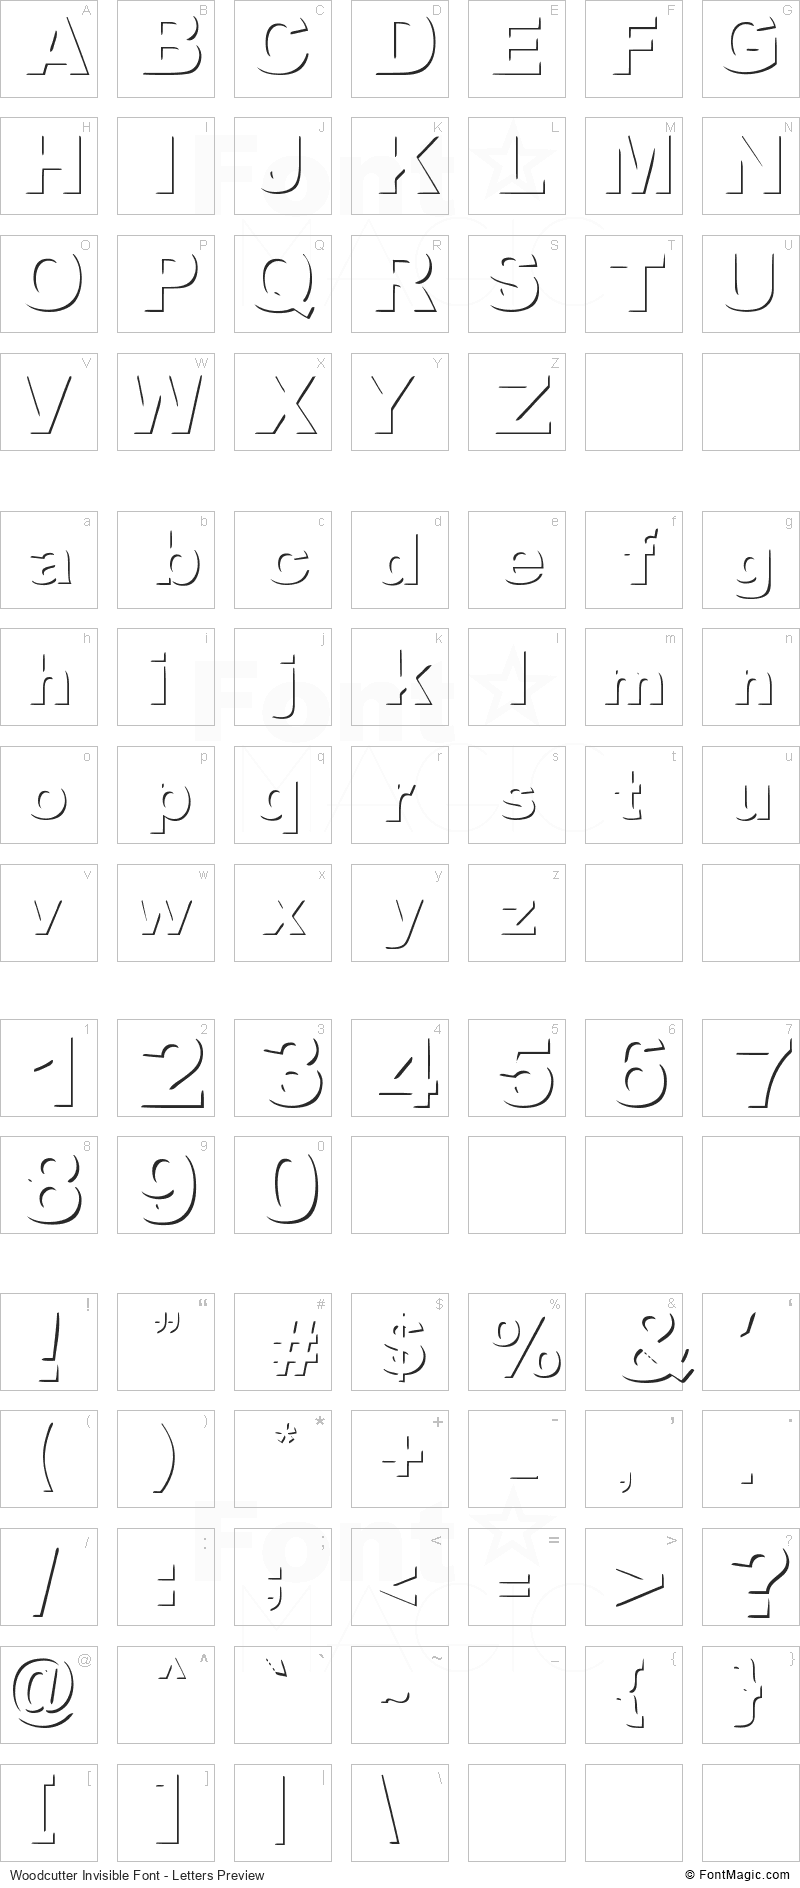 Woodcutter Invisible Font - All Latters Preview Chart